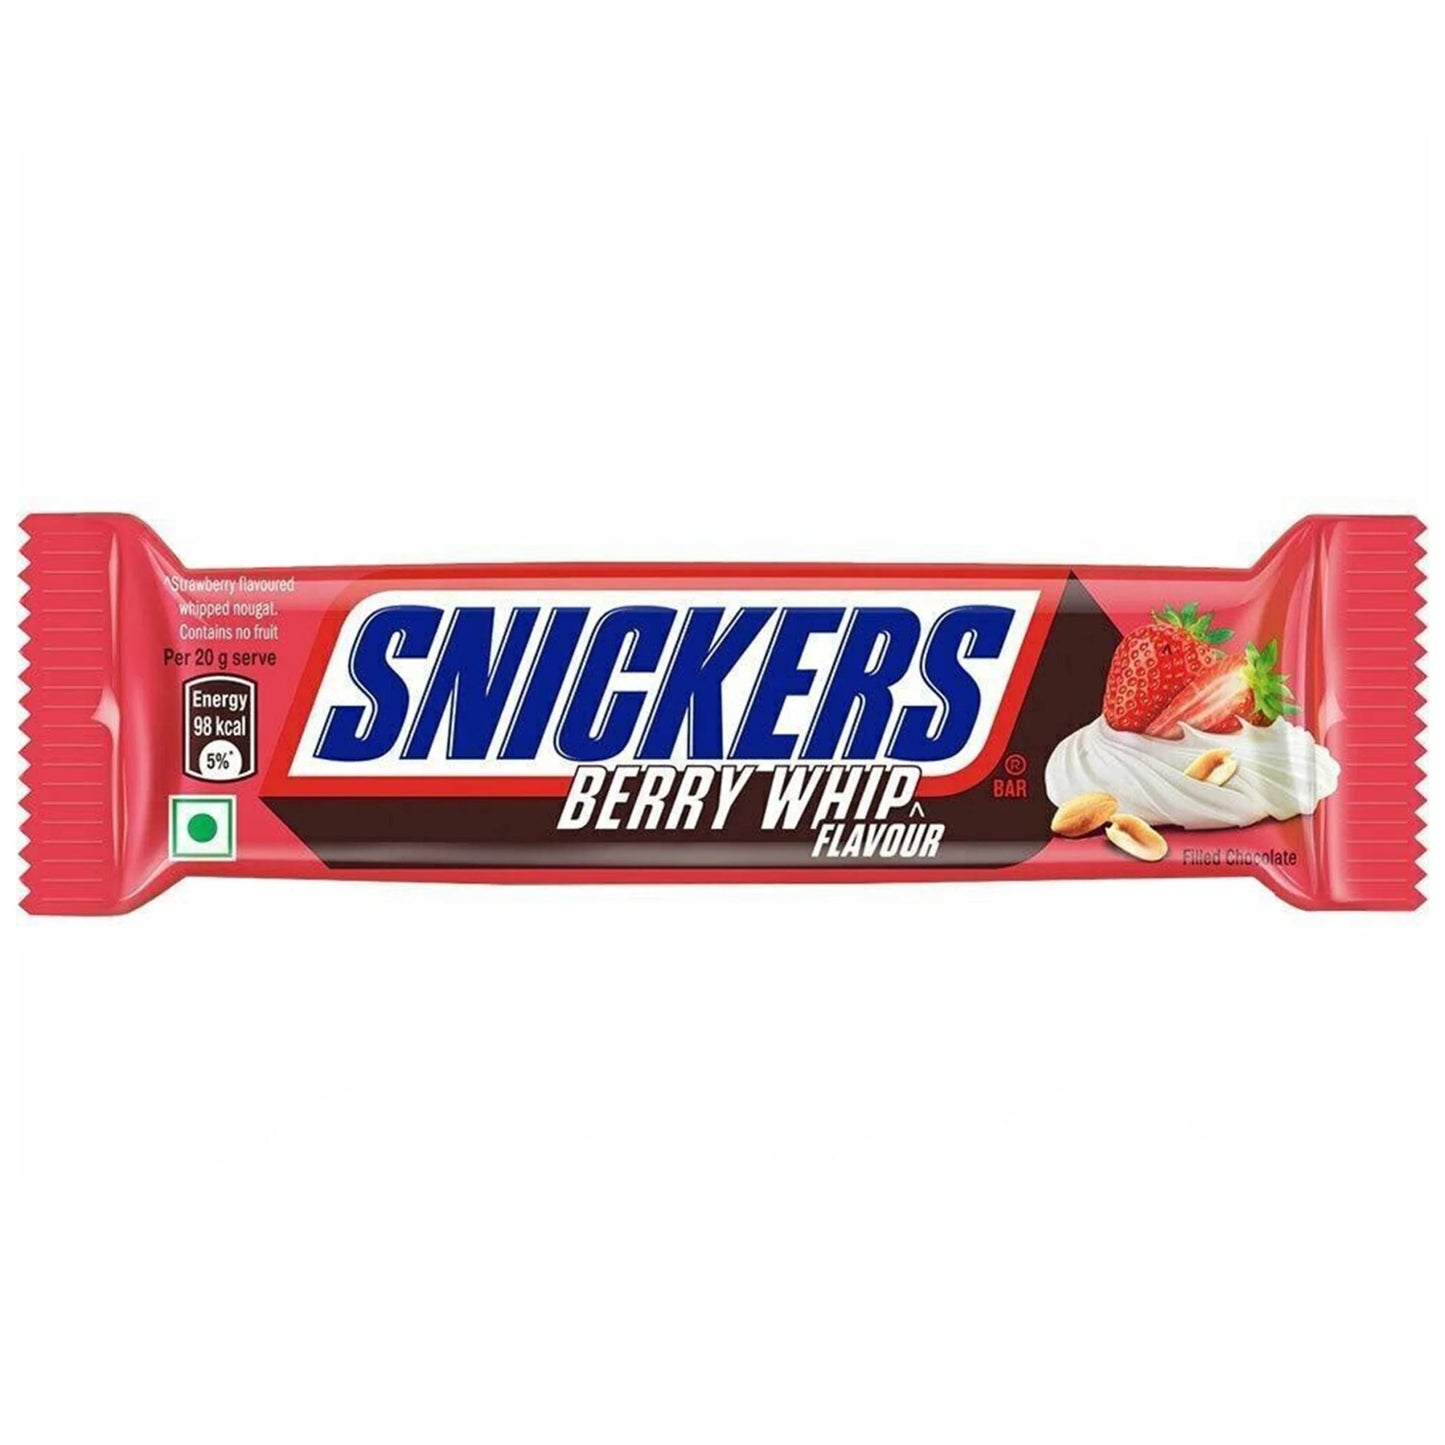 SNICKERS - BERRY WHIP - Sweets Avenue Beauport